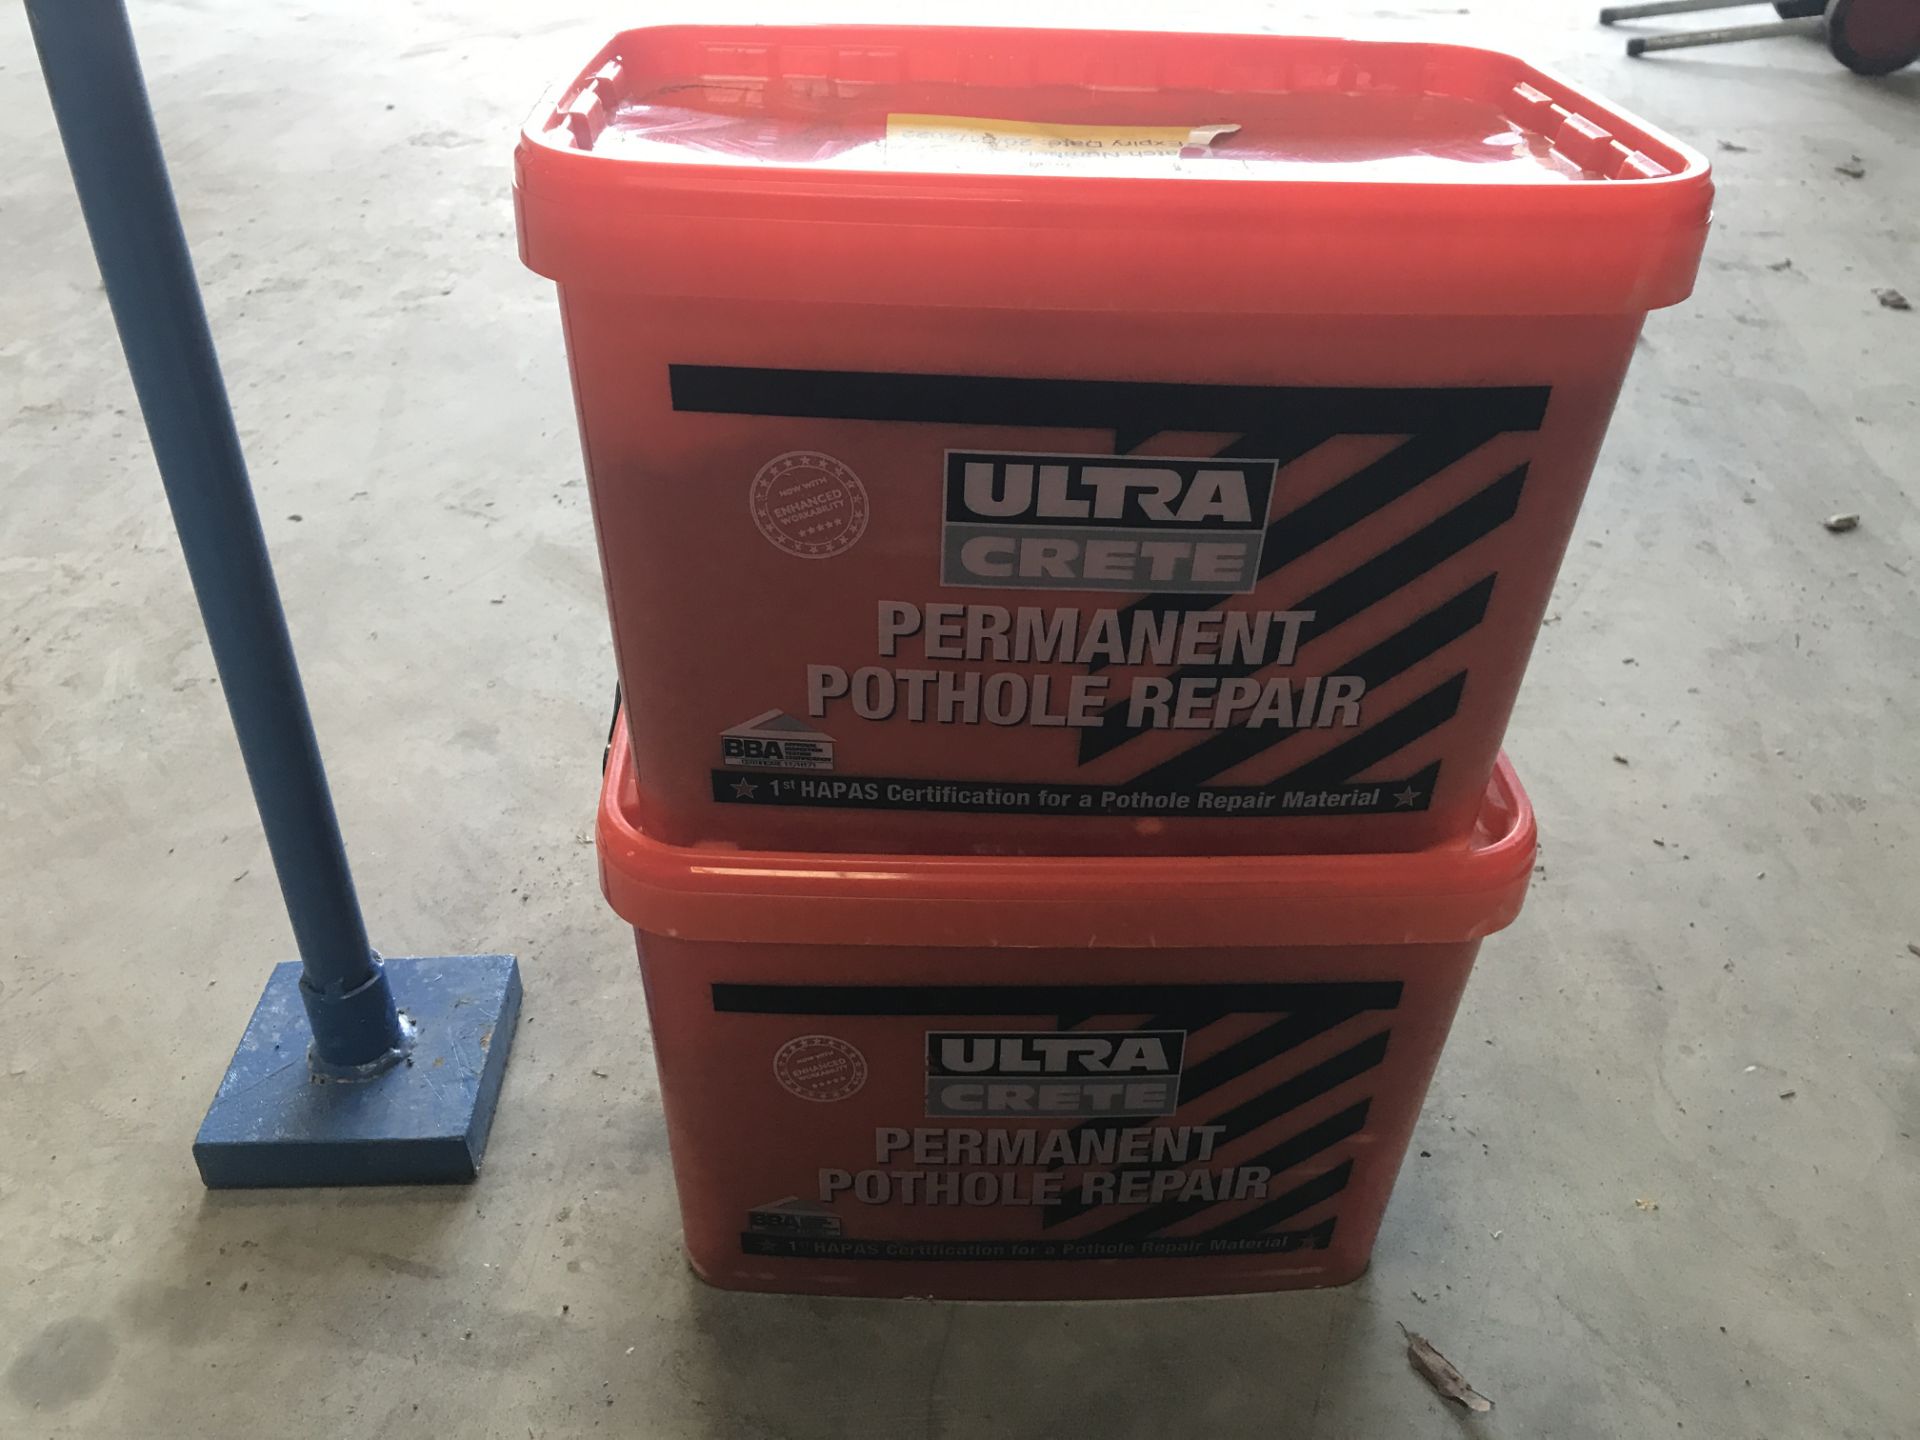 Draper Tools 4.5kg Tarmac Tamper with 2 Tubs Ultra Crete Permanent Pothole Repair Compound ( - Image 2 of 2